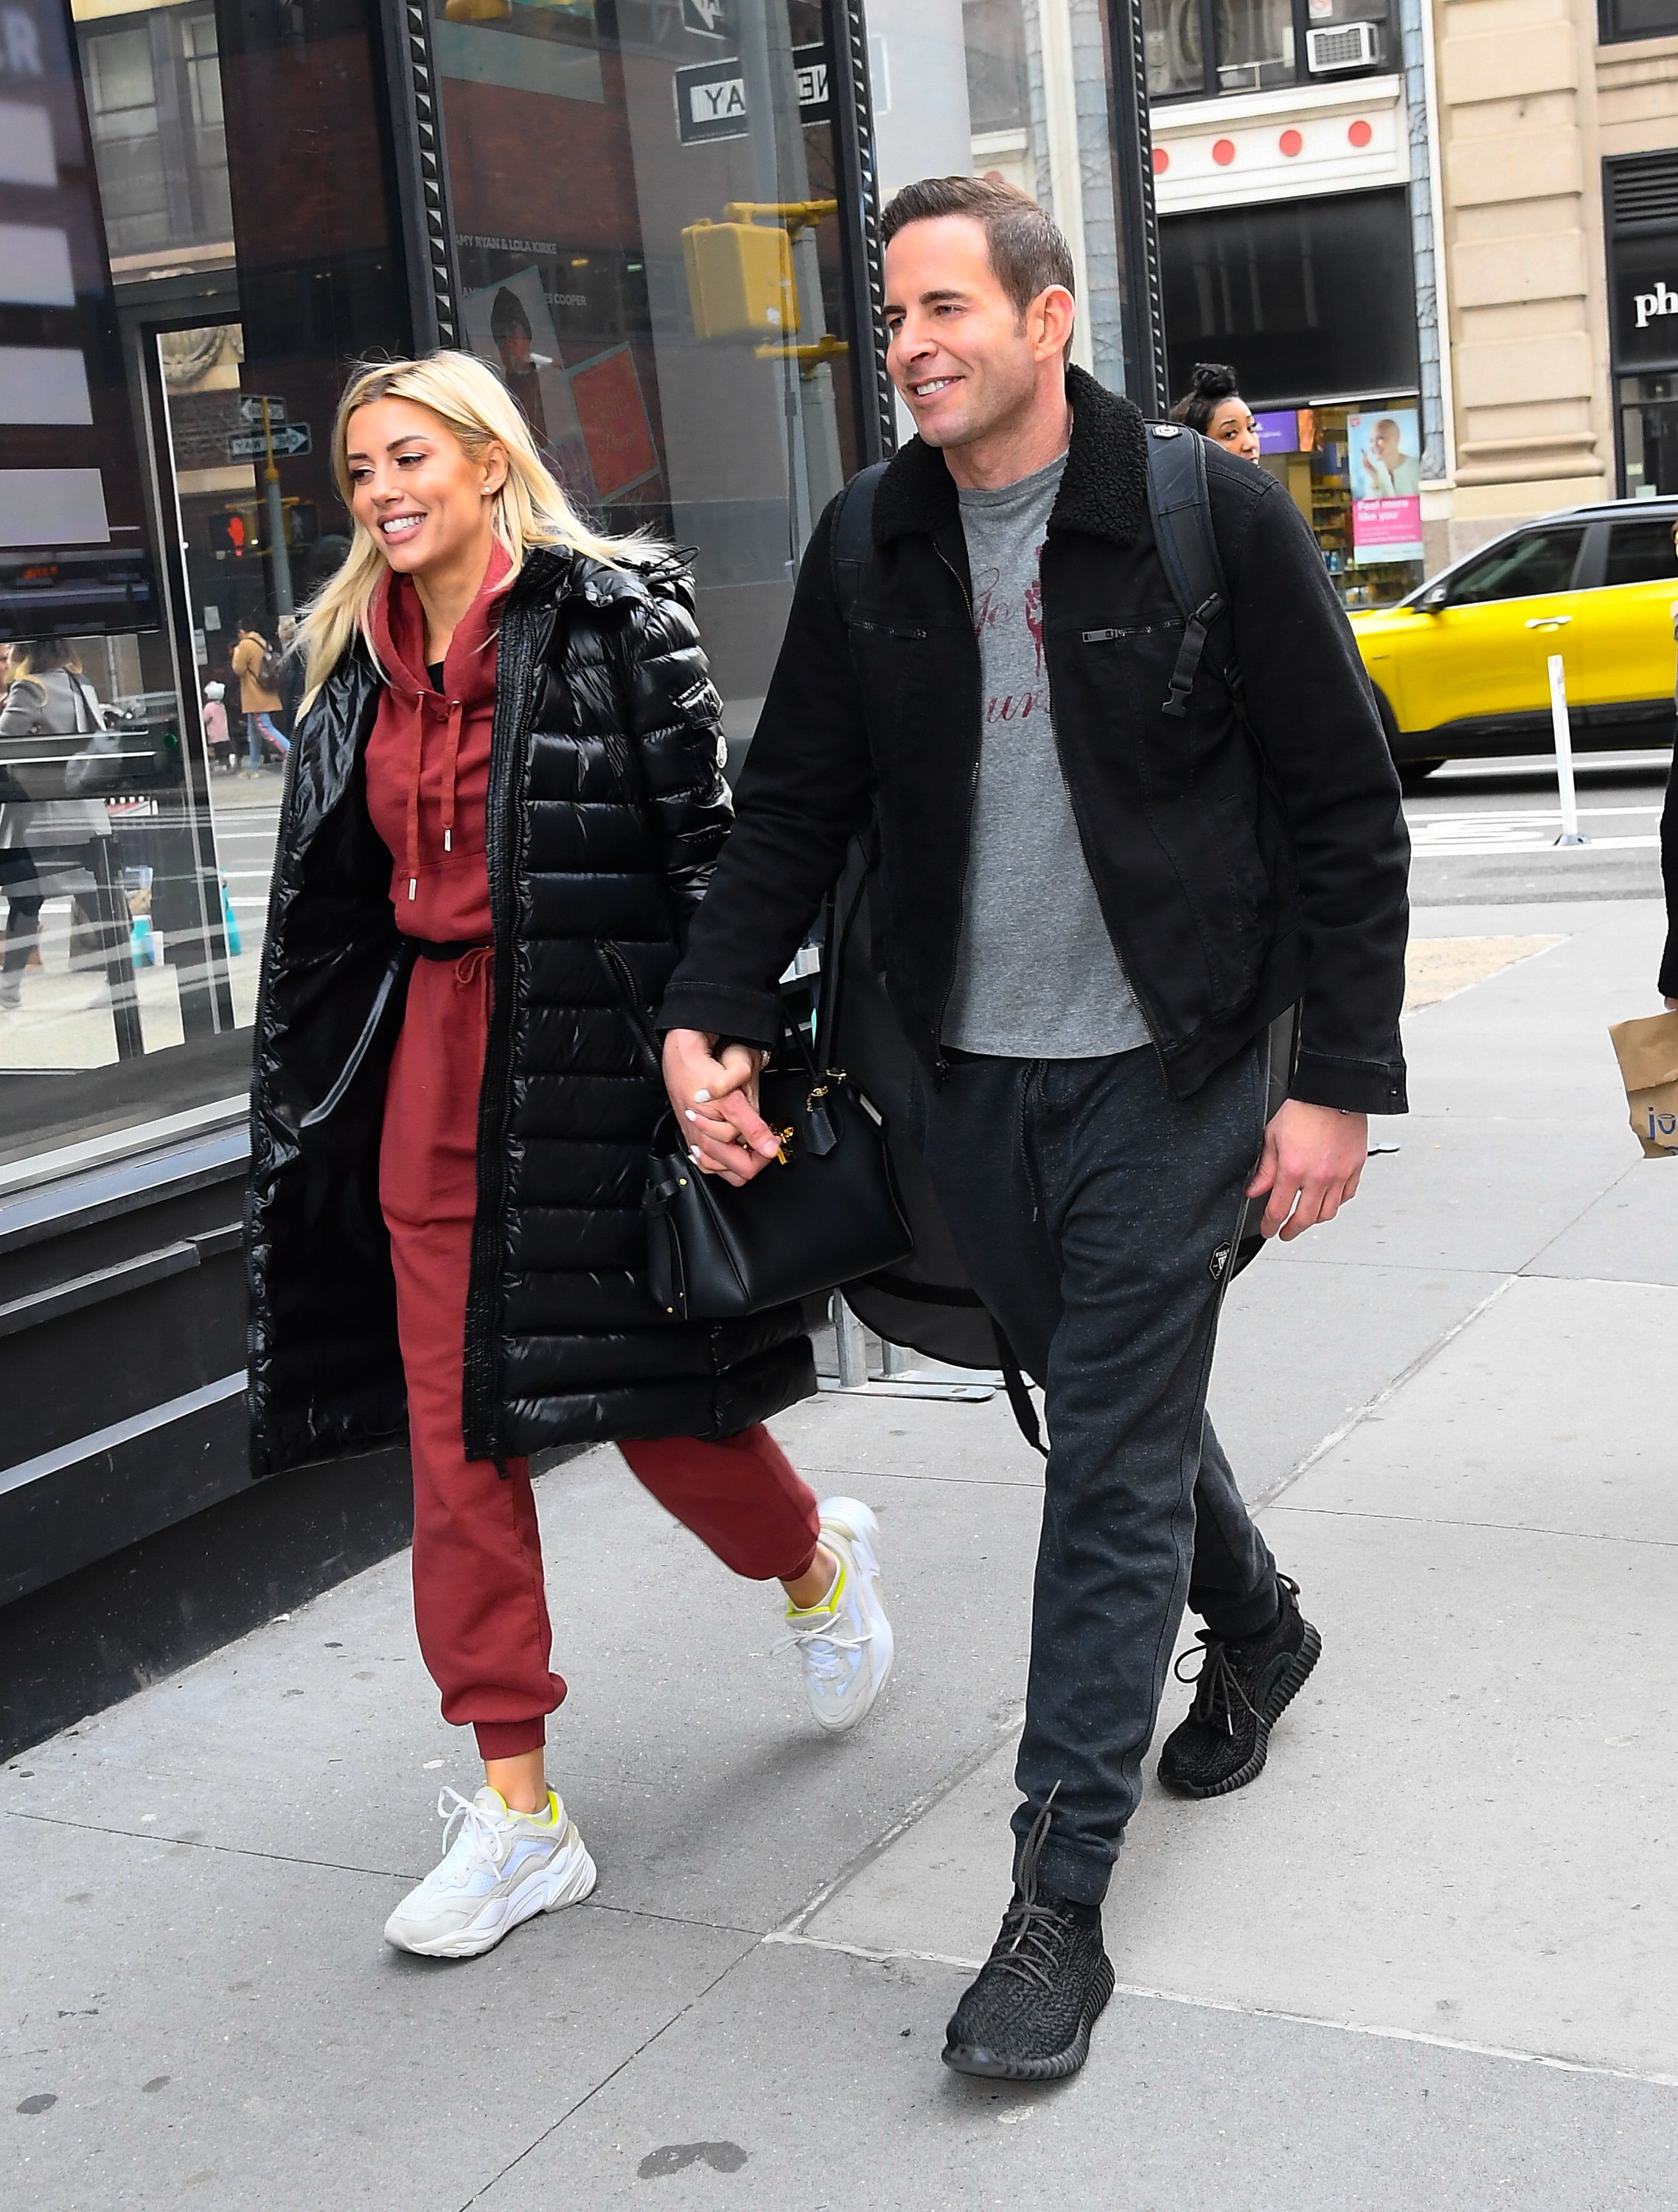 'Flip or Flop' star Tarek EL Moussa and Heather Rae Young smile and hold hands walking together